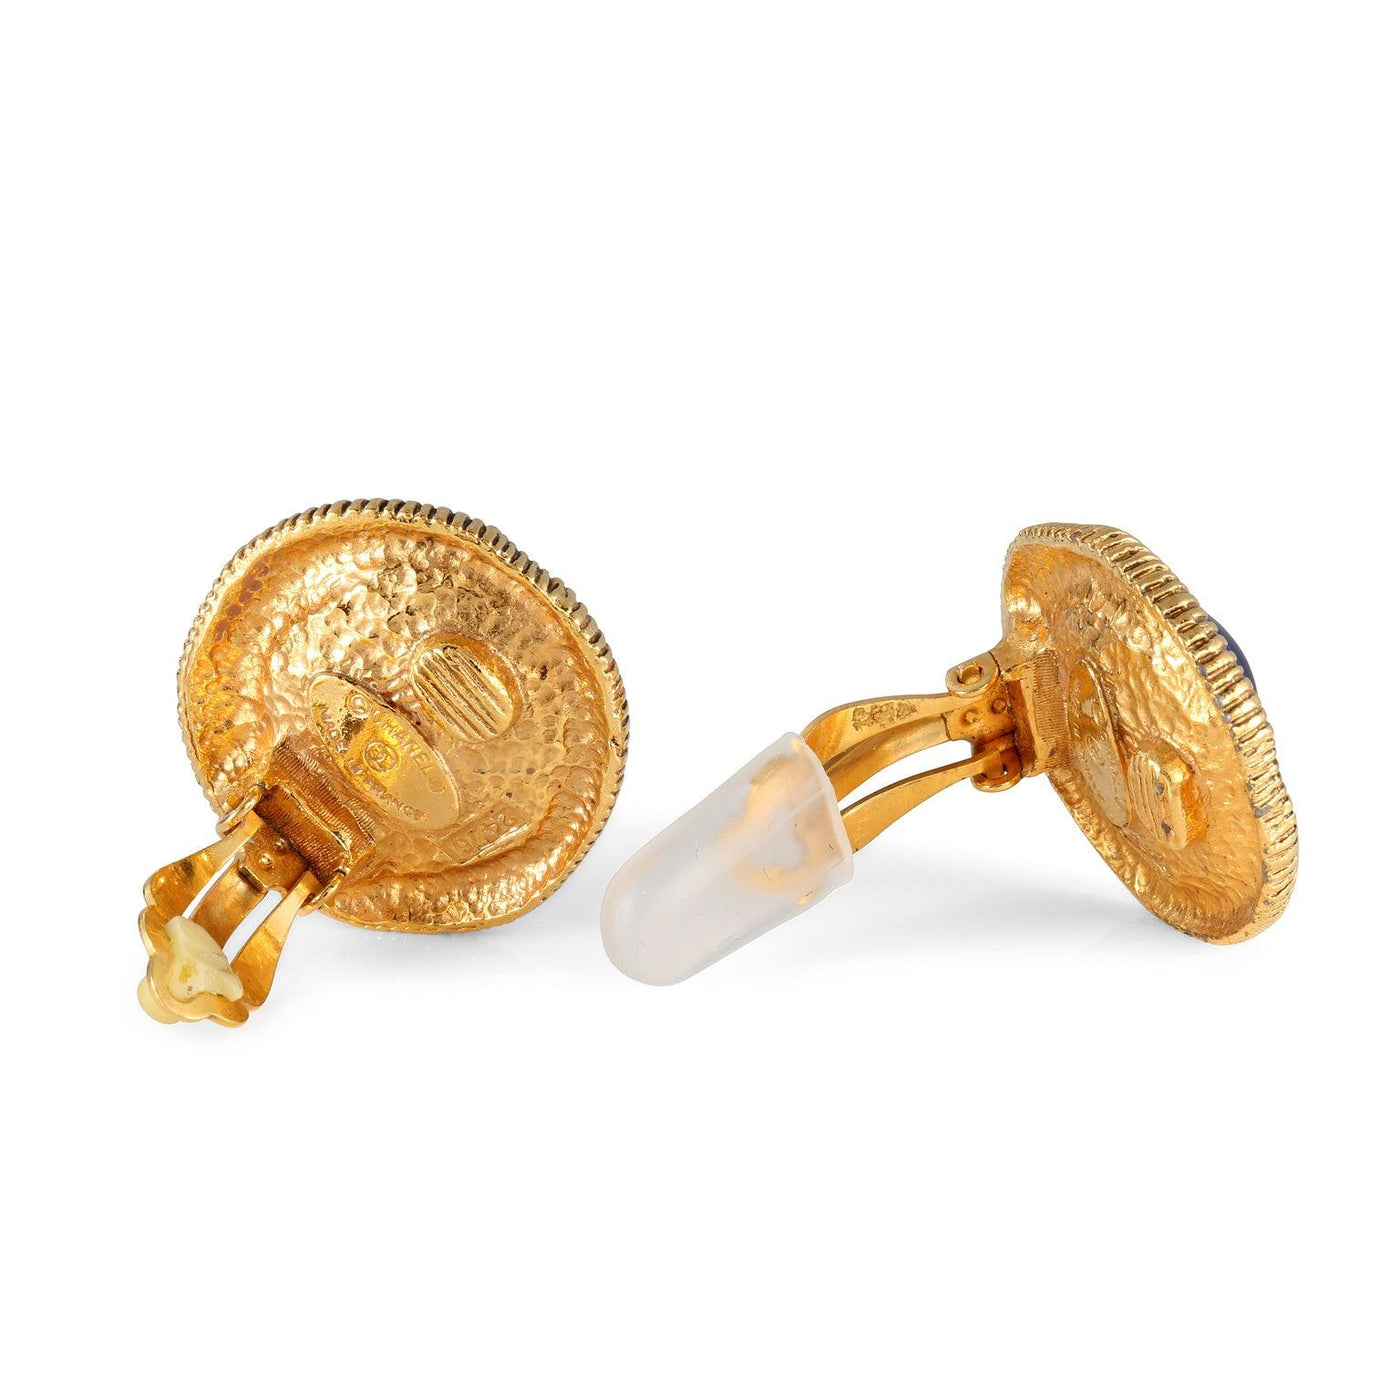 Chanel Blue Gripoix Gold Earrings - Only Authentics